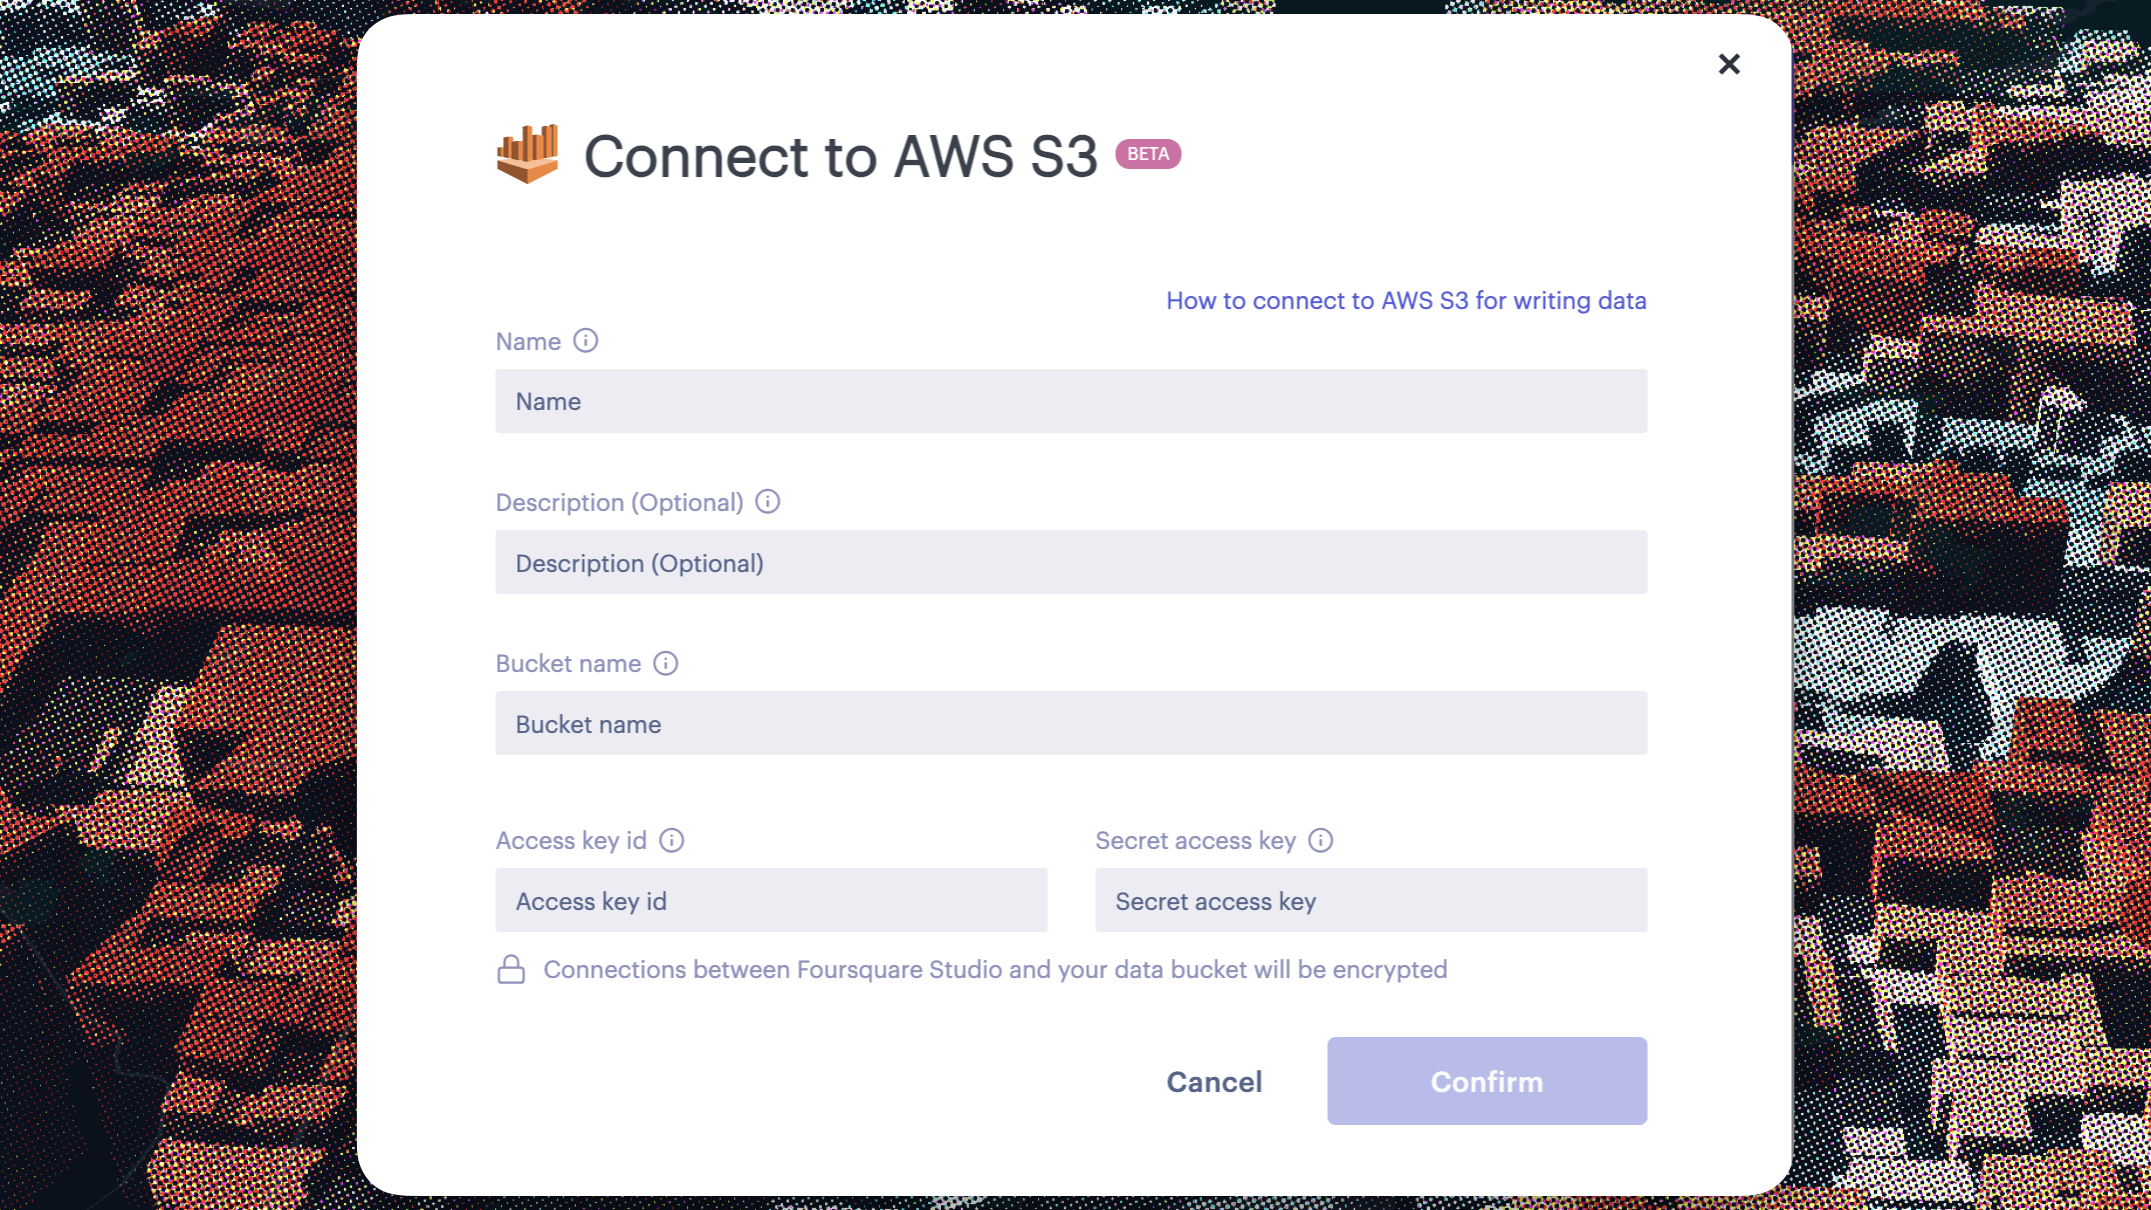 The AWS S3 connector form.